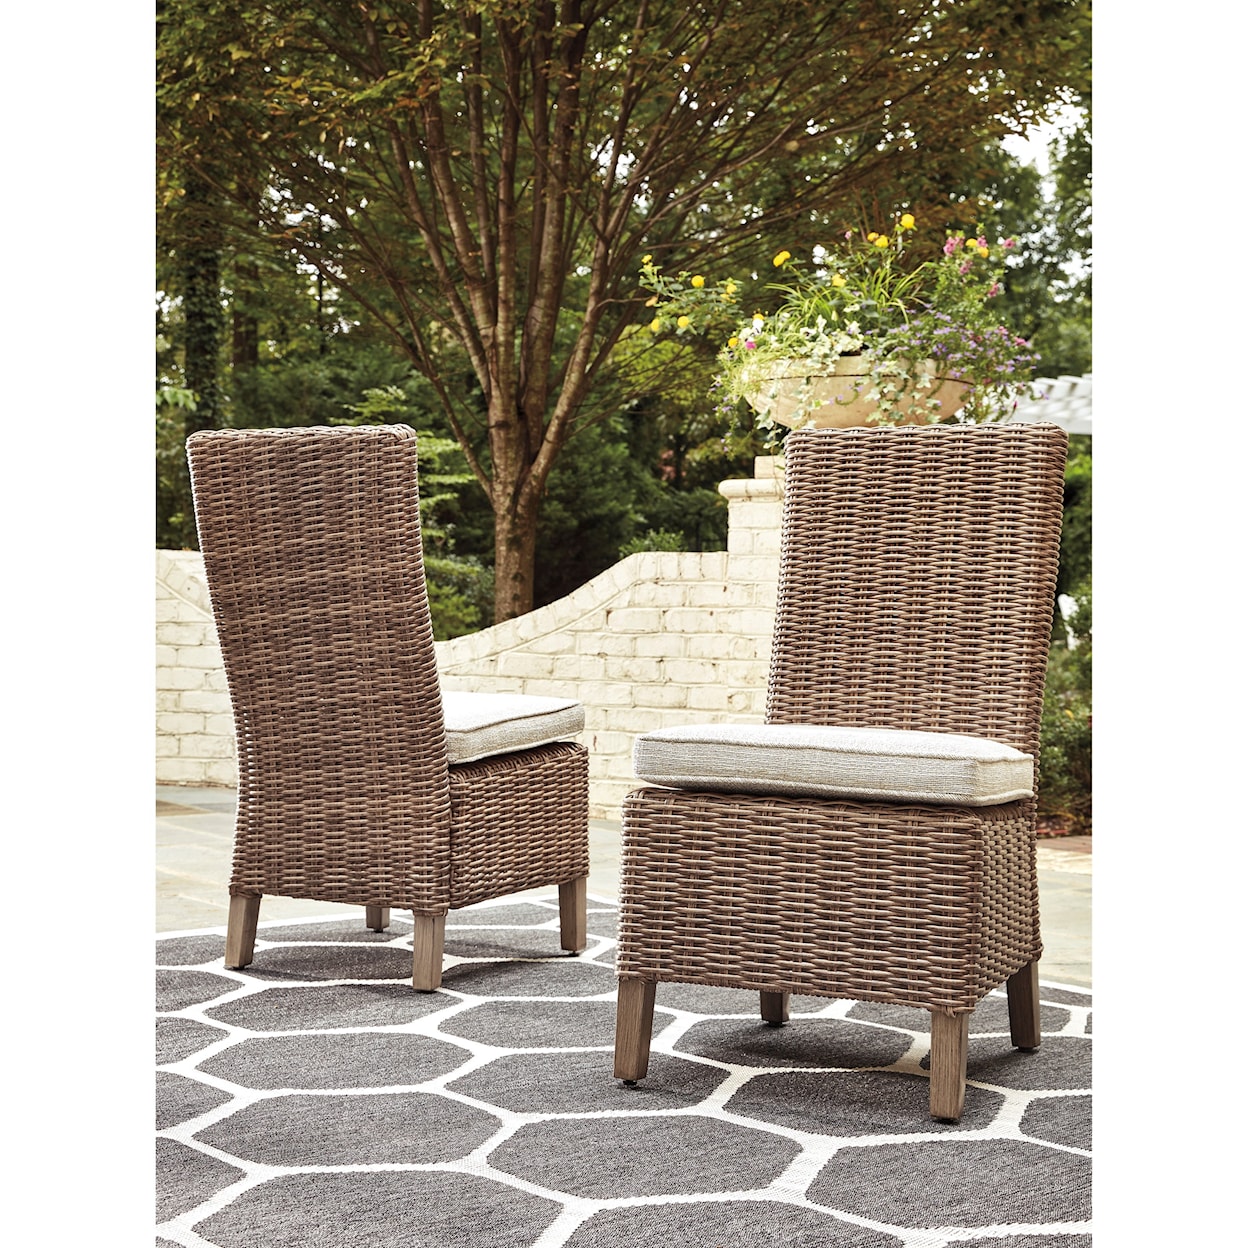 Ashley Furniture Signature Design Beachcroft Set of 2 Side Chairs with Cushion